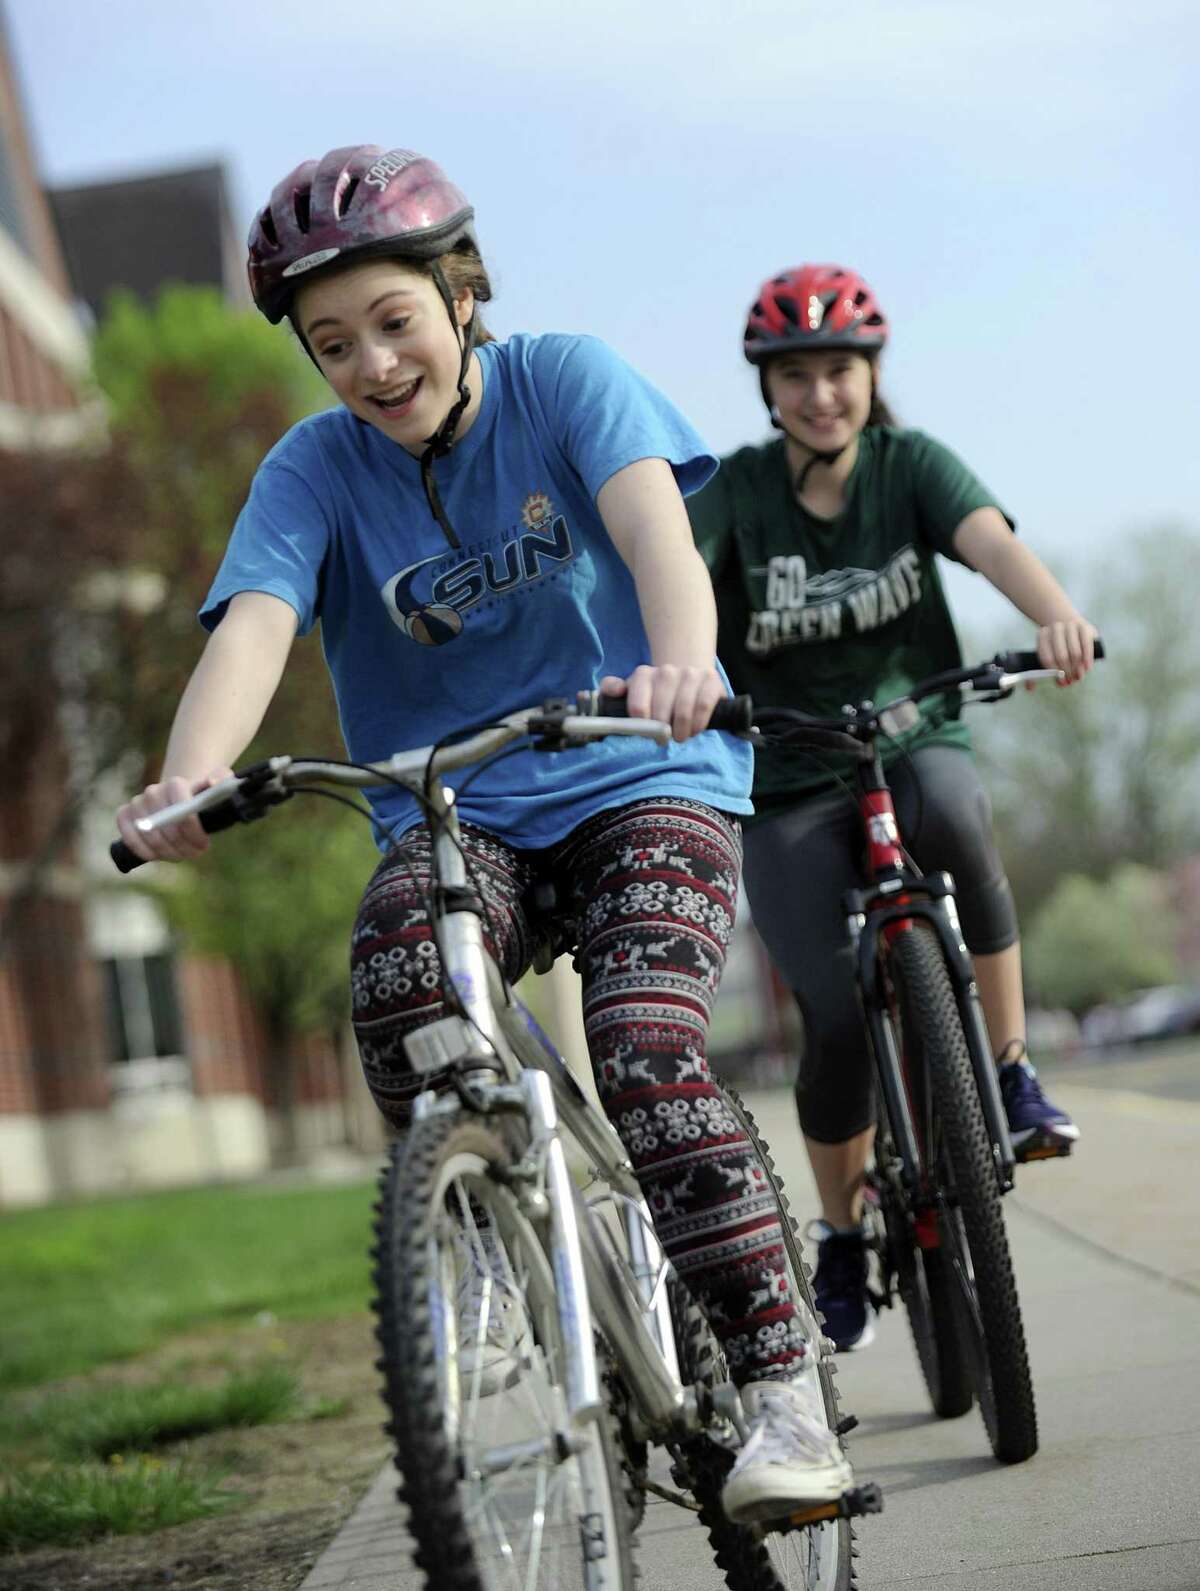 McKenna Riedl, 14, left, and Lilian Vito, 15, ride bicycles around New Milford High School Monday morning. The school started a new bike safety initiative where students learn these skills in gym class.